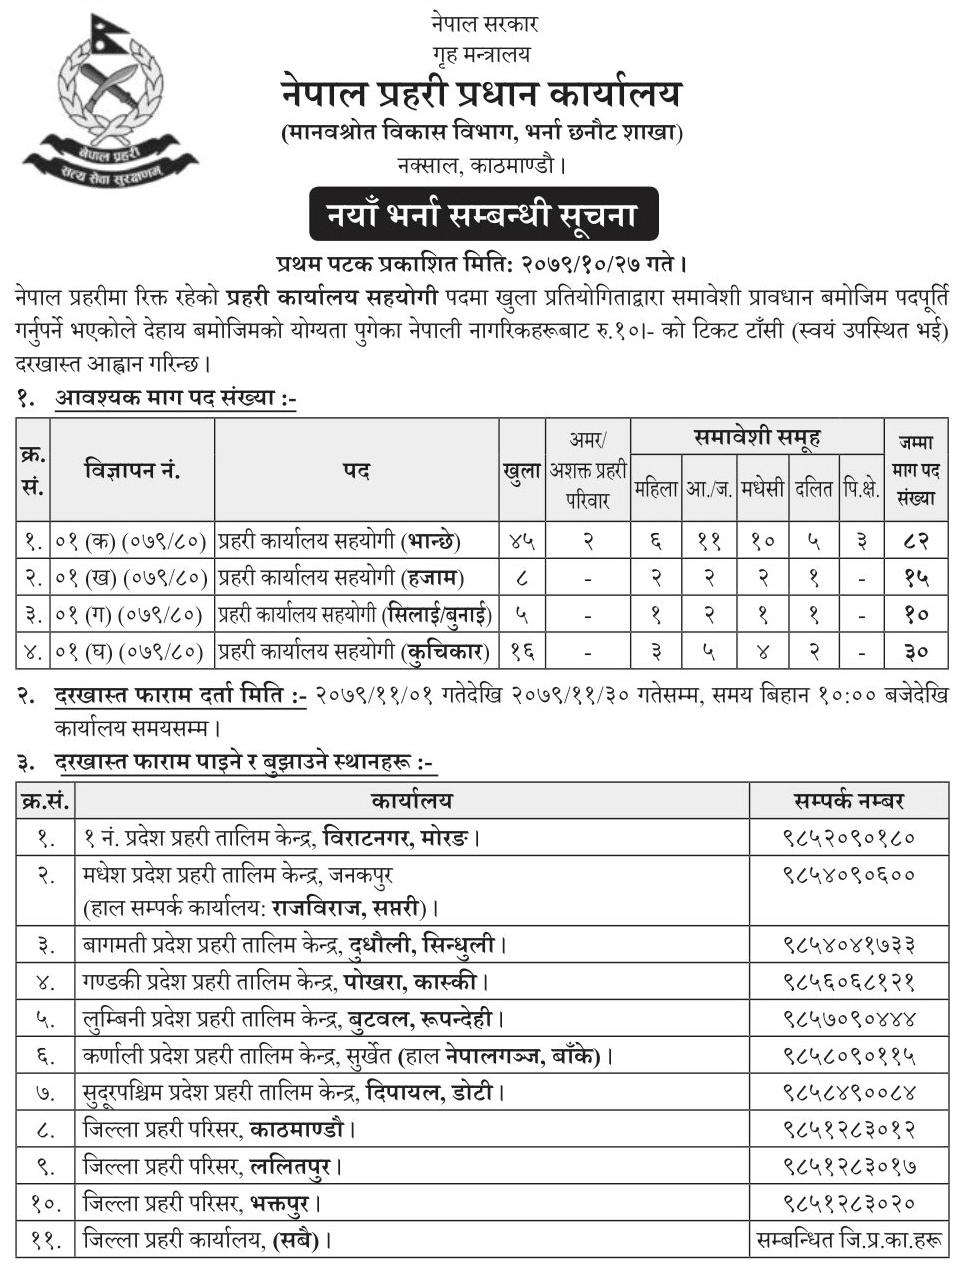 Nepal Police Vacancy for Police Office Assistant